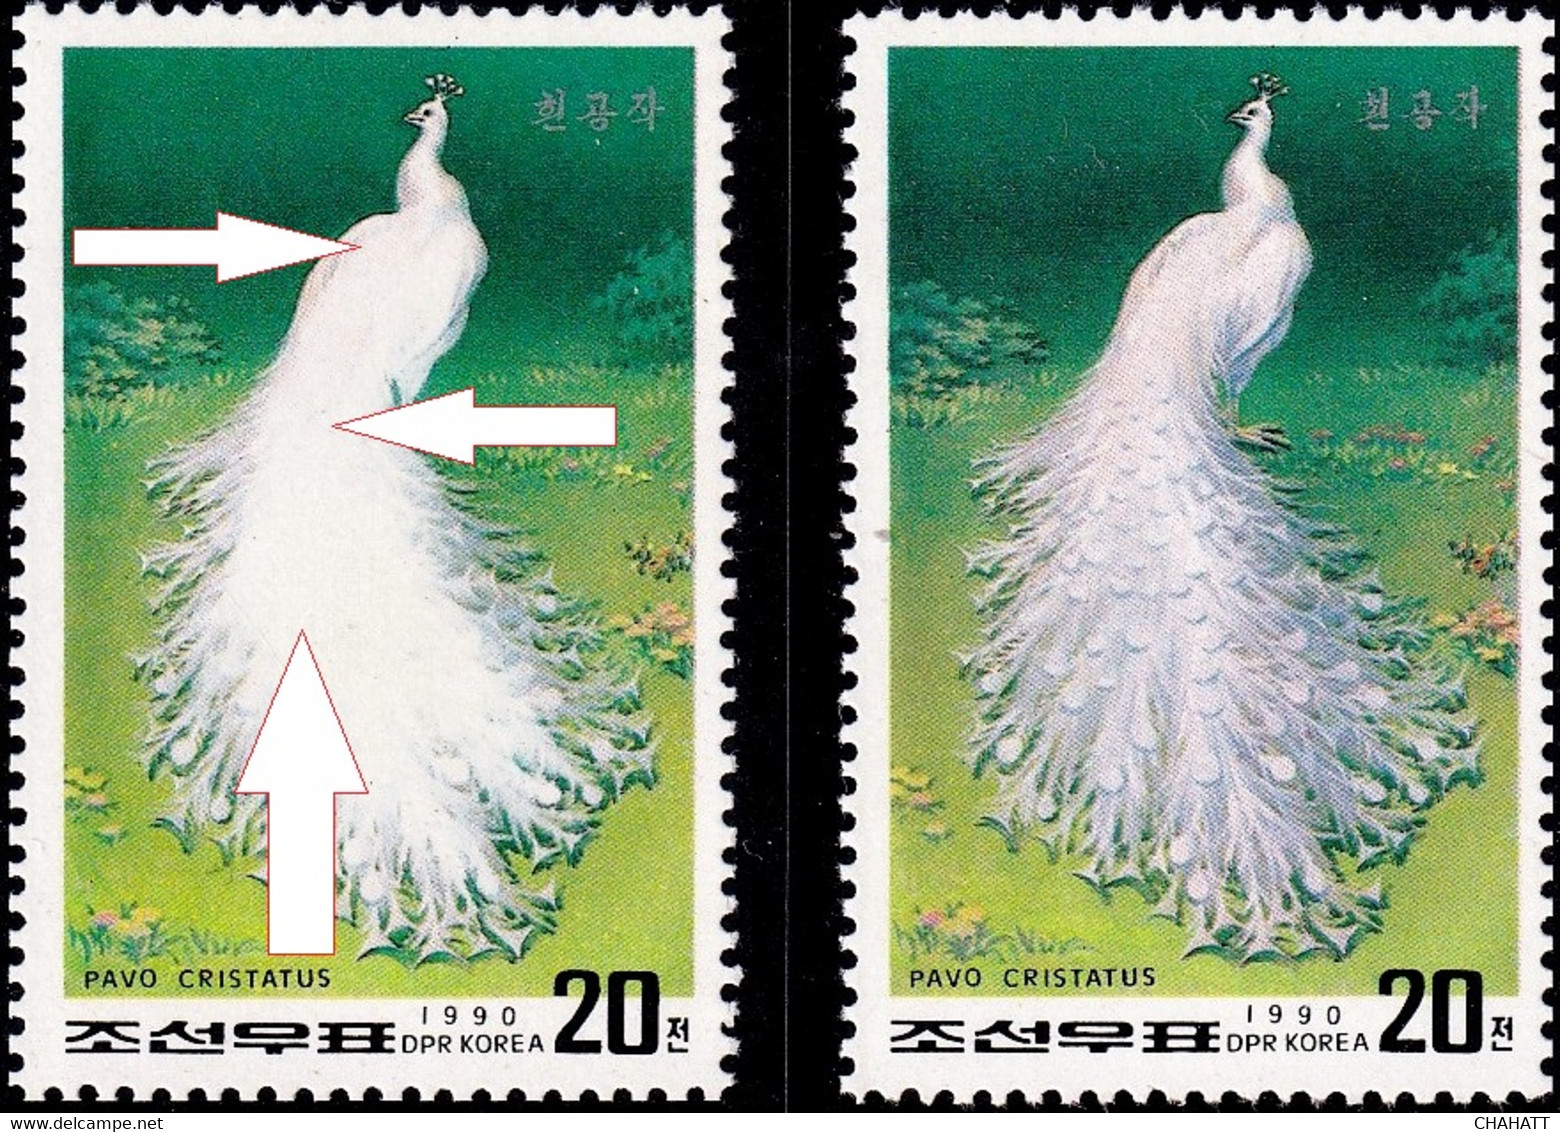 WHITE PEACOCK- PHEASANTS-ERROR WITH NORMAL -EYELETS MISSING- KOREA- 1990-EXTREMELY SCARCE- MNH-BR4-16 - Pfauen